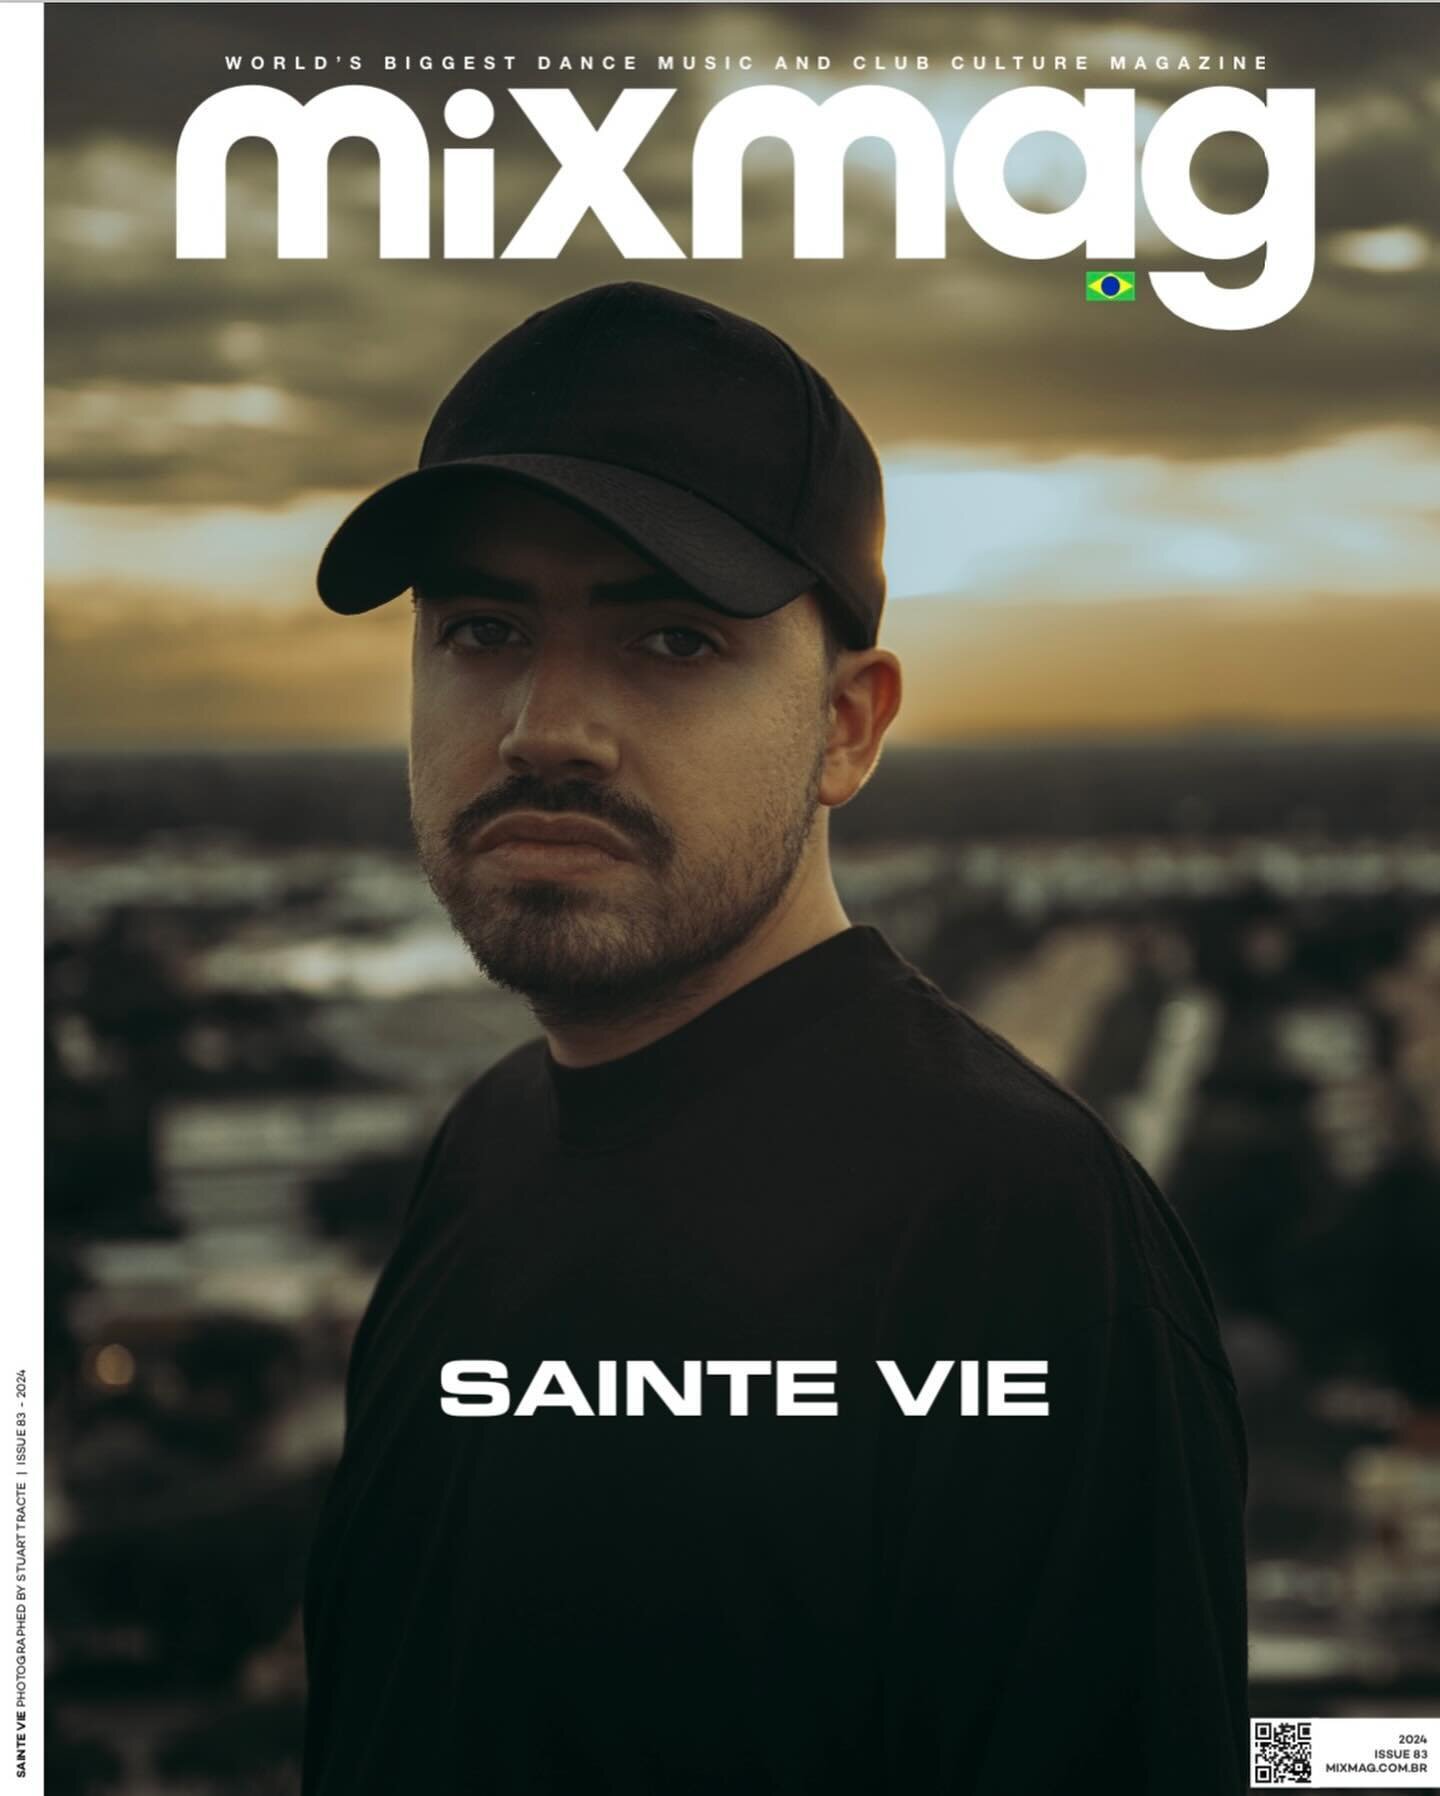 So fucking cool to have my third Mixmag cover, and my second with @saintevieofficial - 

It was truly an honor when Pablo &amp; his team reached out again to create images for a momentous occasion. Getting a chance to hang out for a few hours, talk a